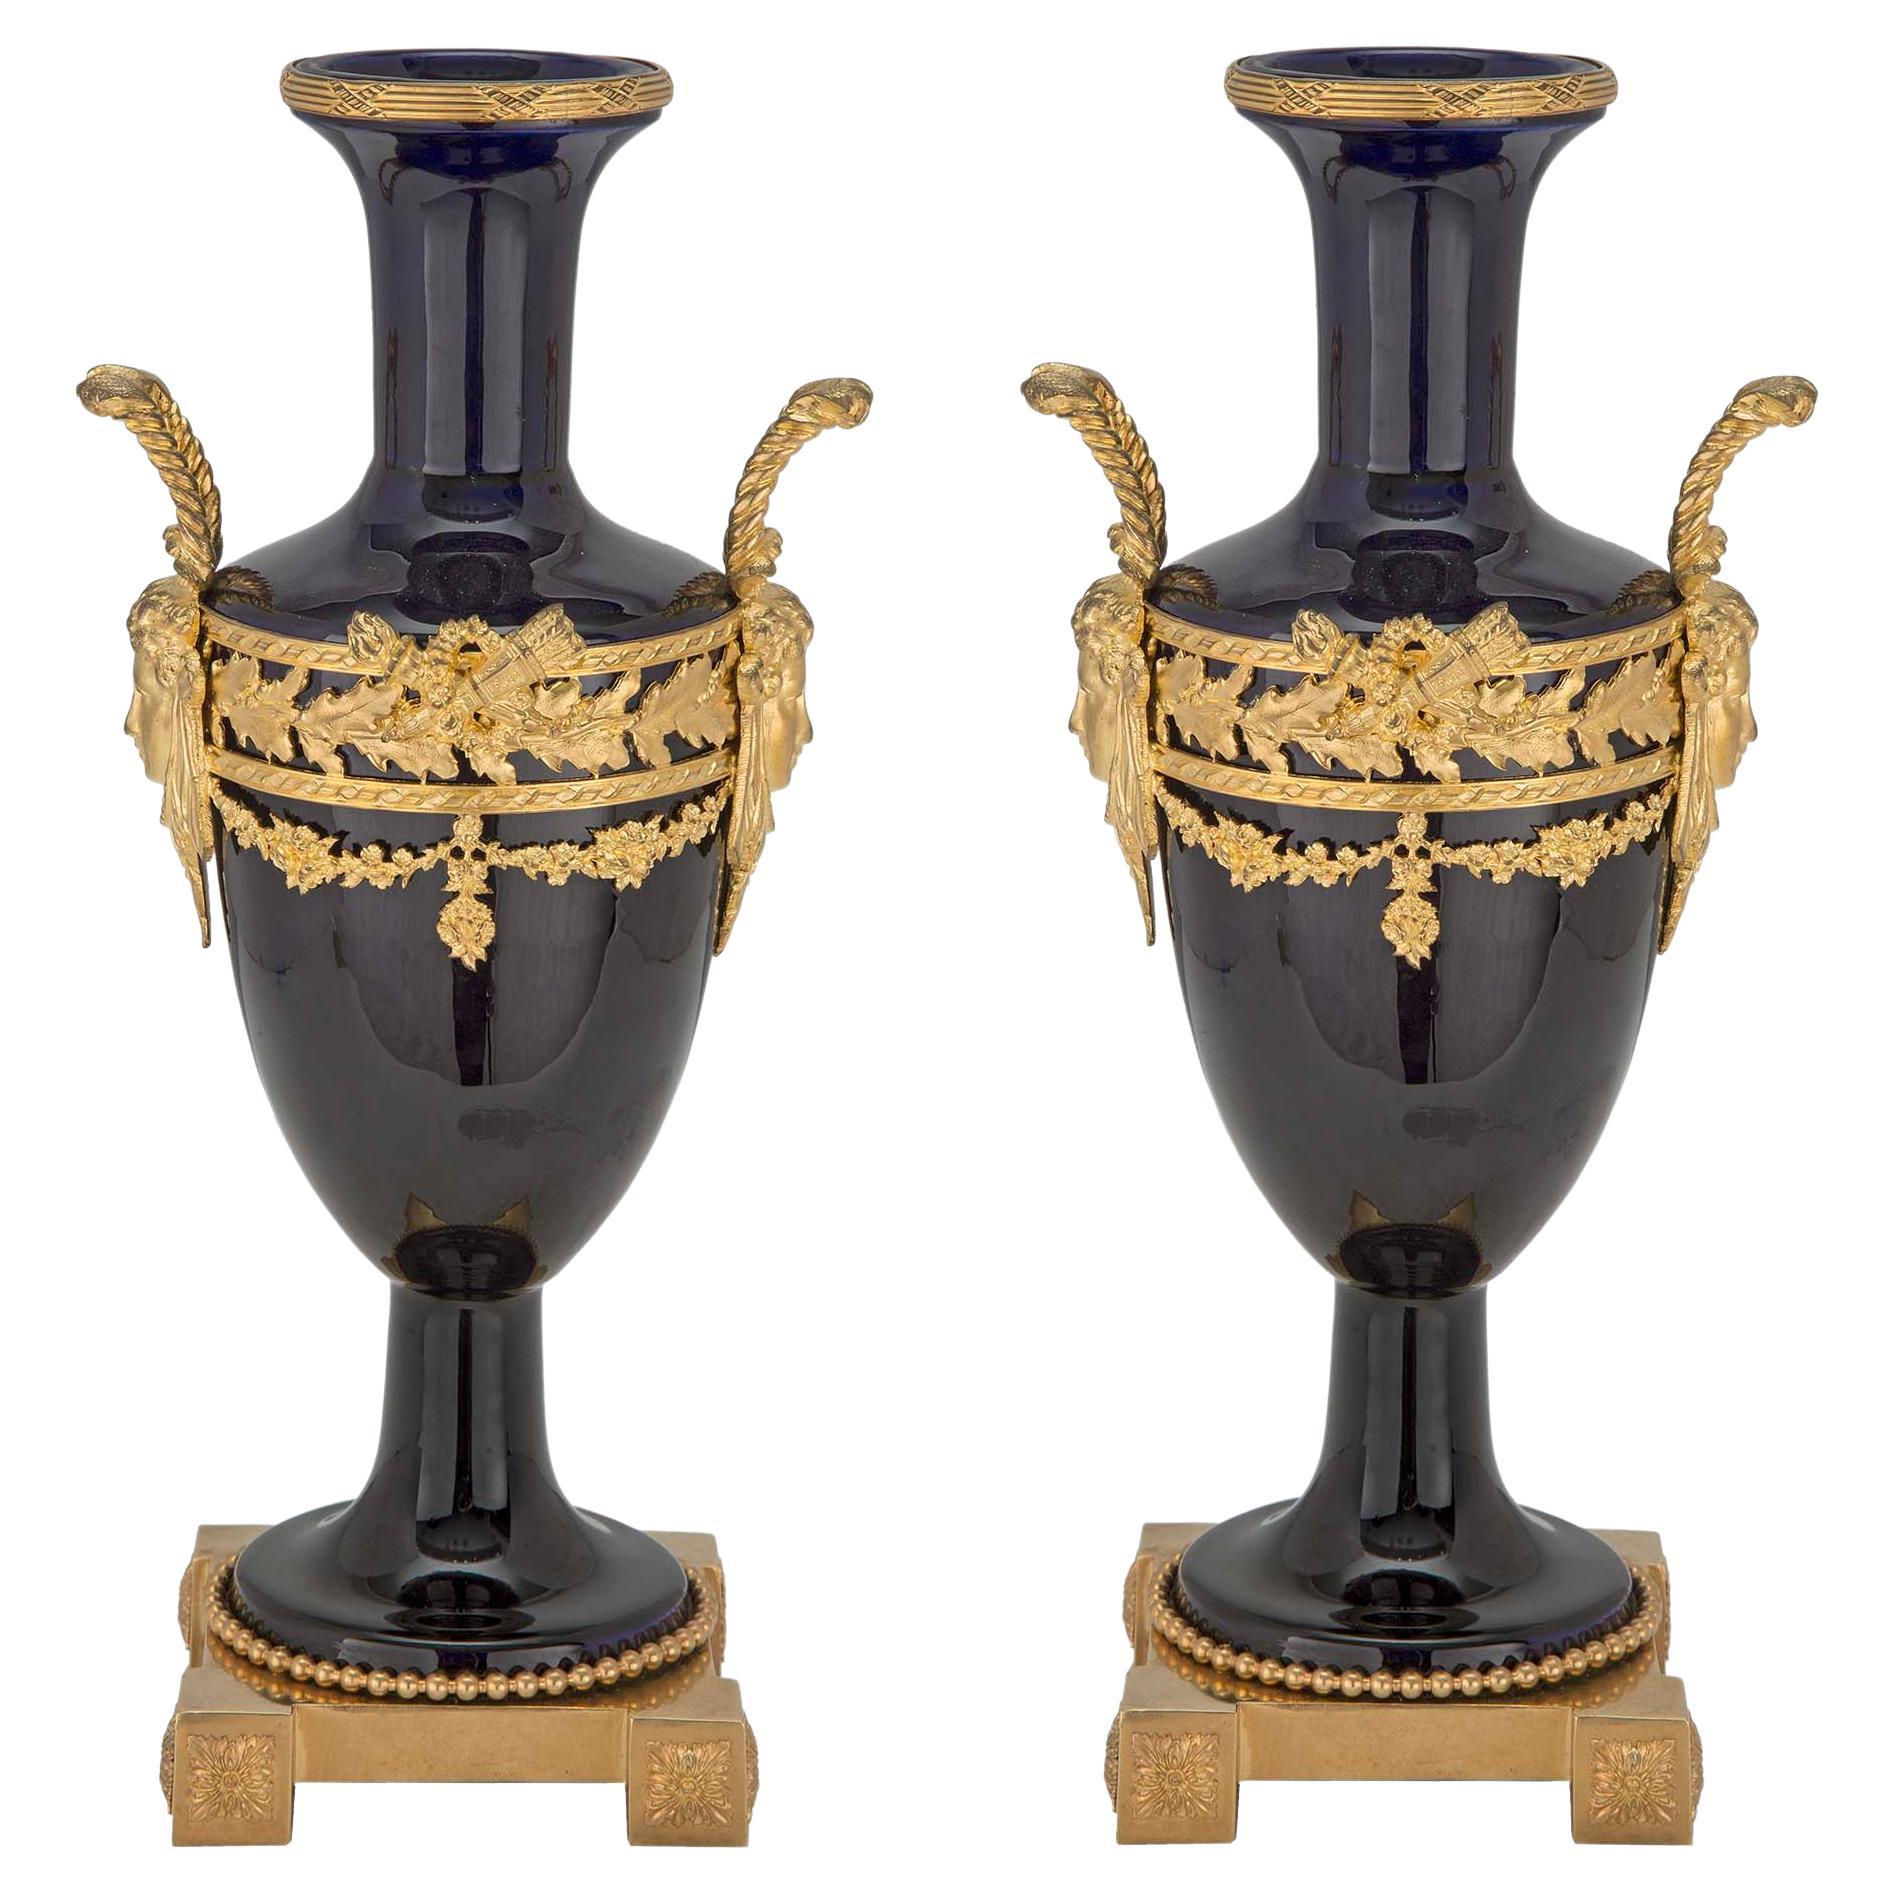 Pair of French 19th Century Louis XVI Style Porcelain and Ormolu Vases